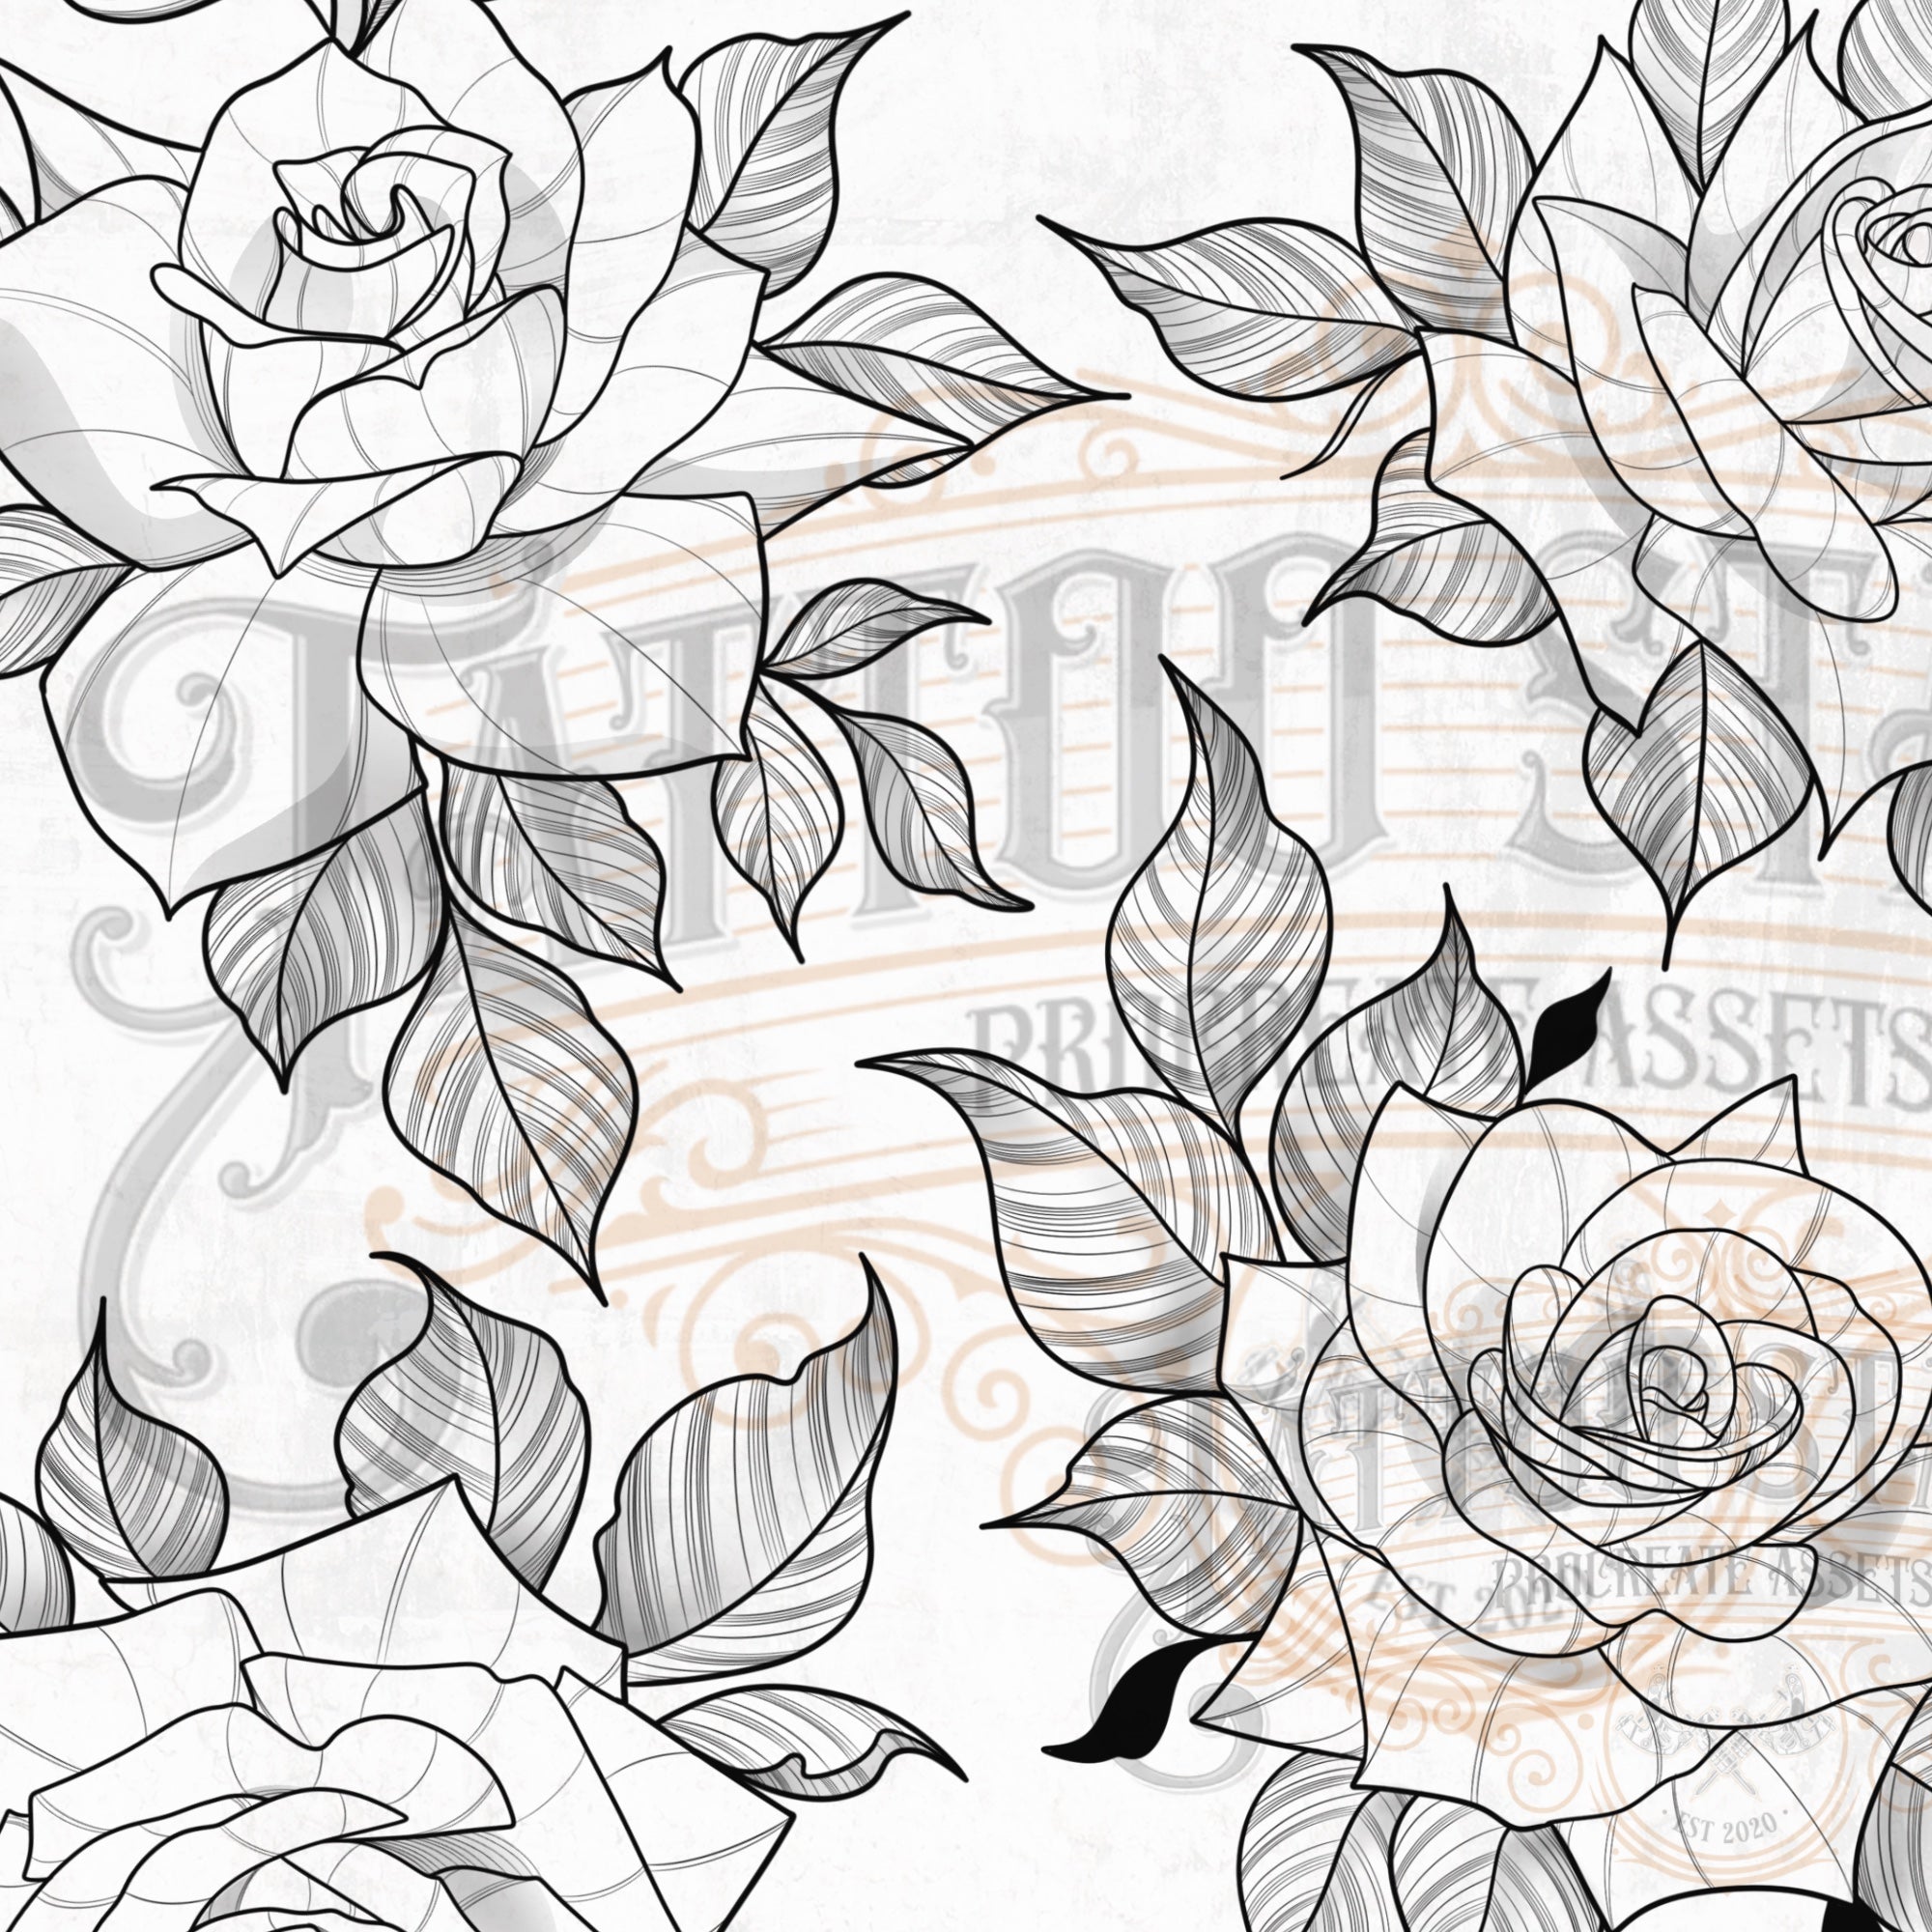 Rose Flowers Tattoo Designs from GraphicRiver